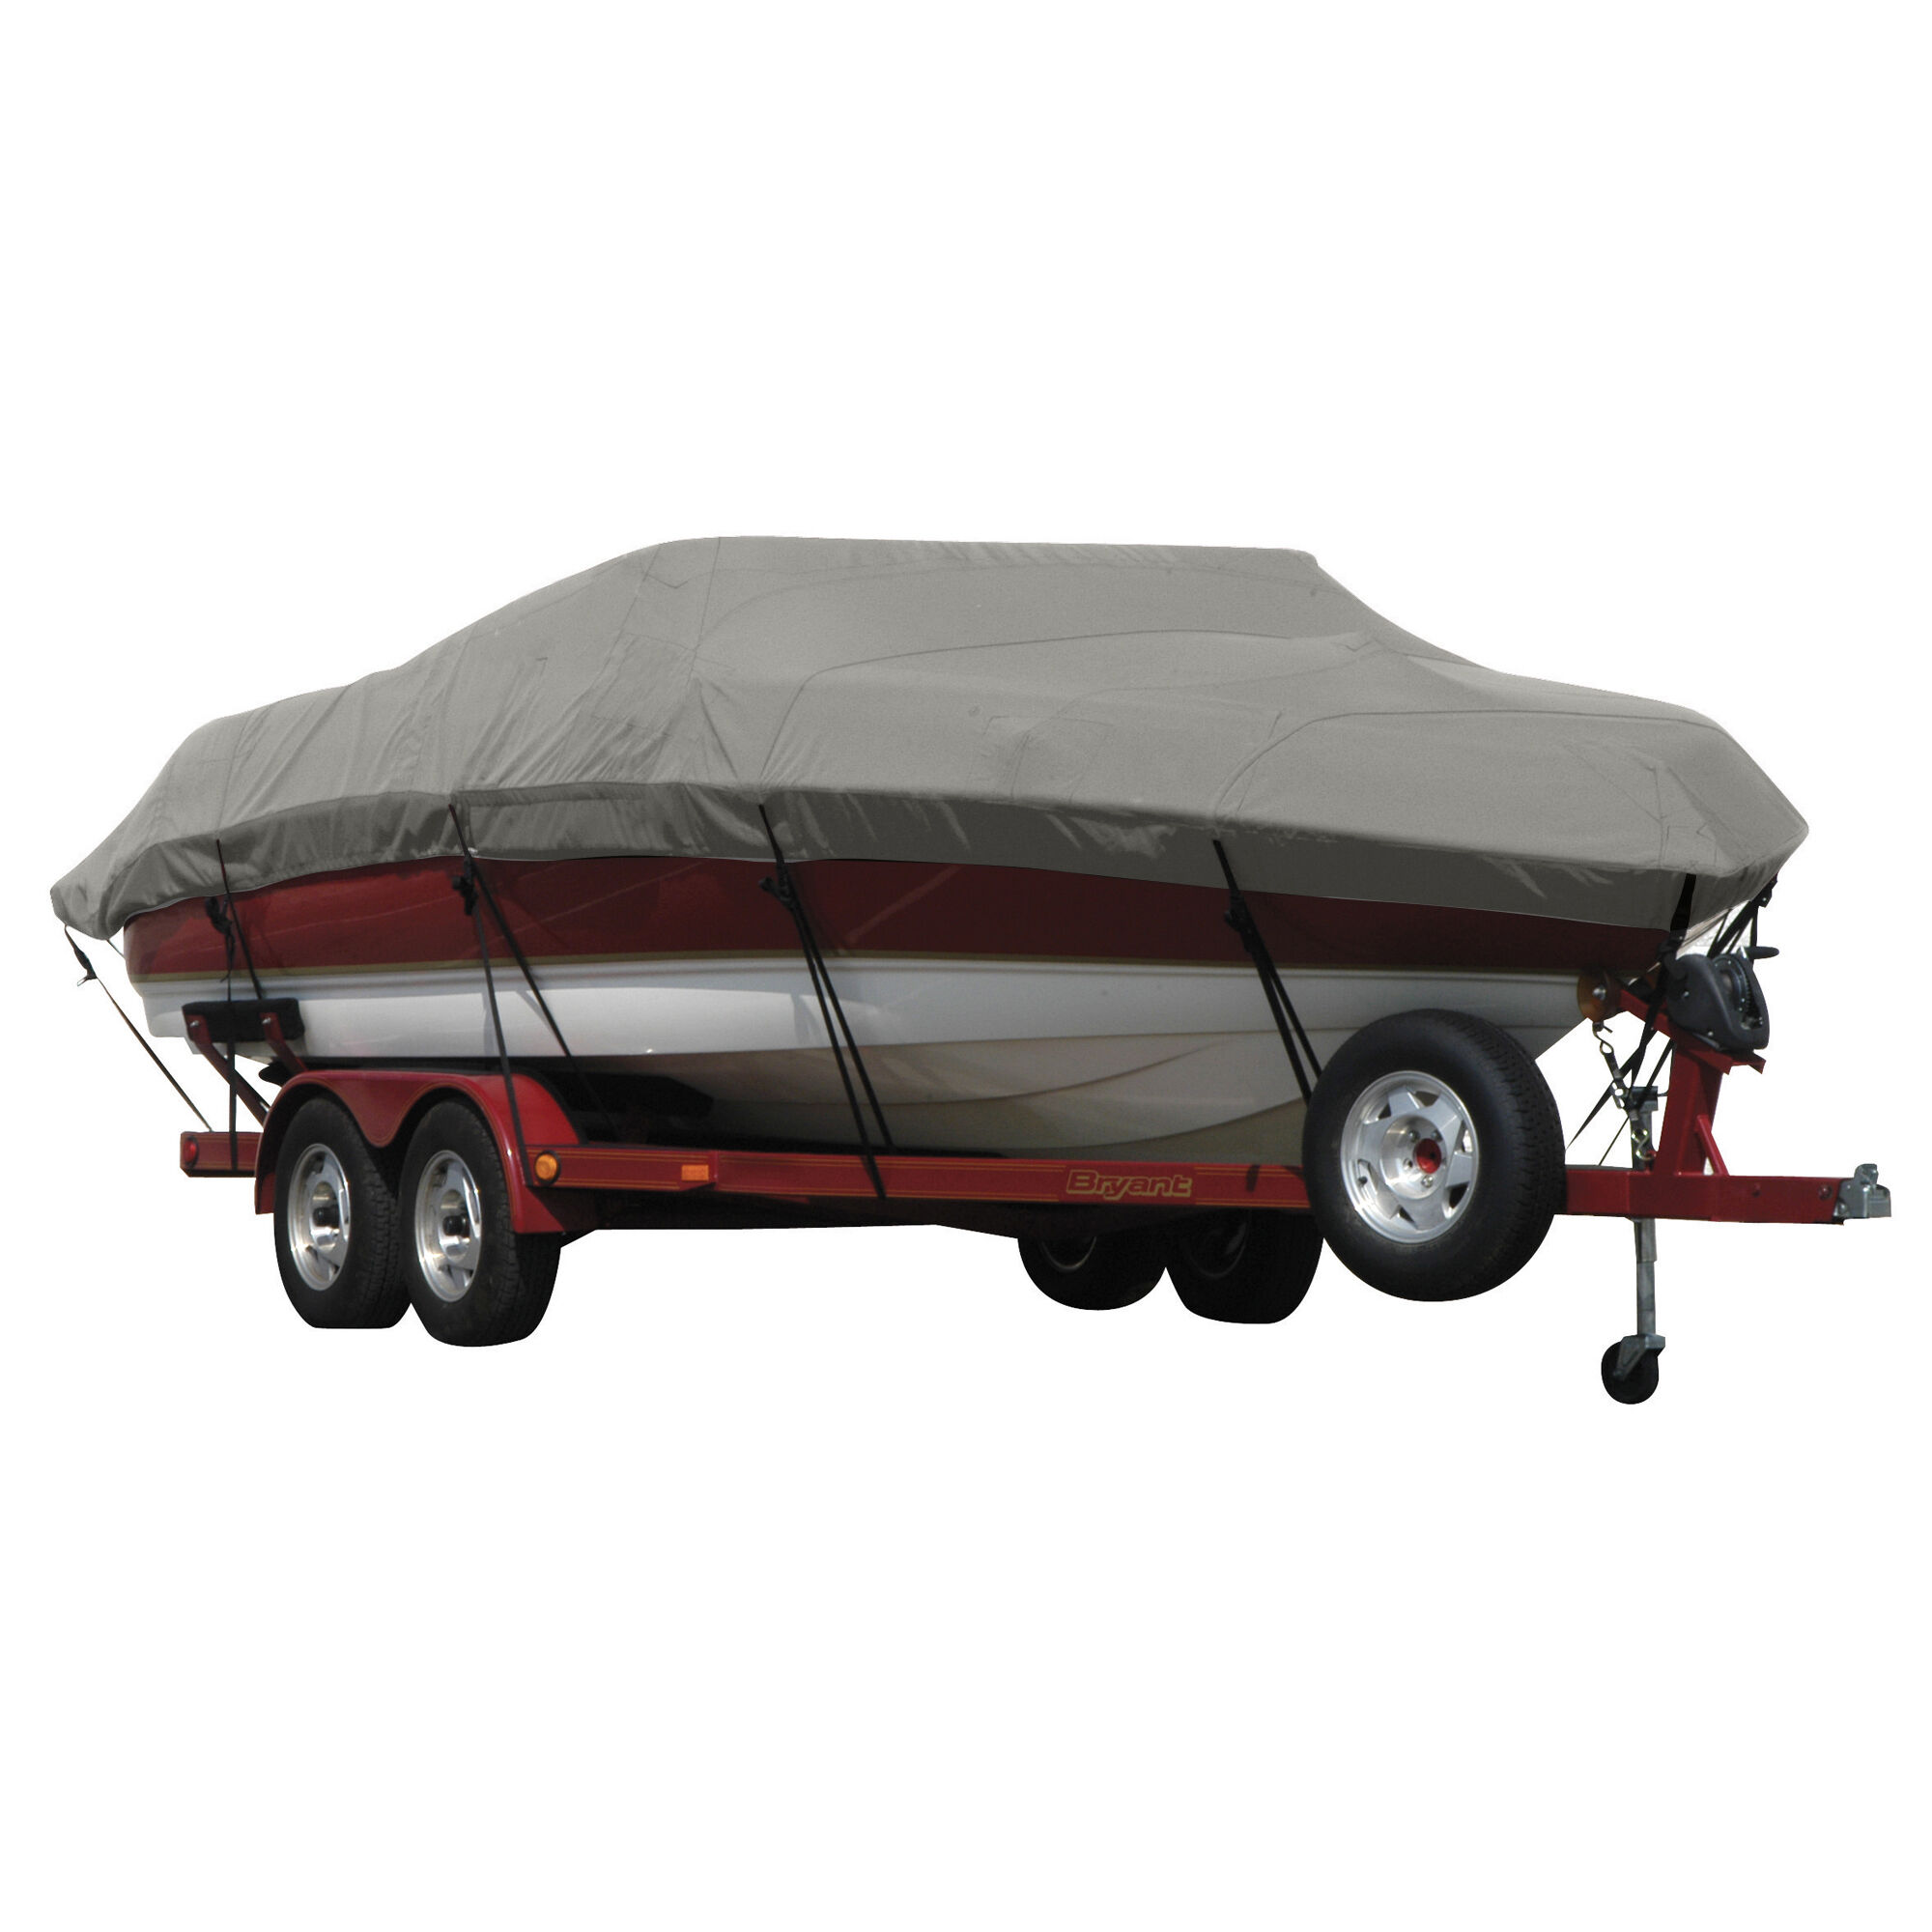 Covermate Exact Fit Sunbrella Boat Cover for Crestliner Rampage 2100 Rampage 2100 w/ Port Trolling Motor O/B. Charcoal Grey Heather in